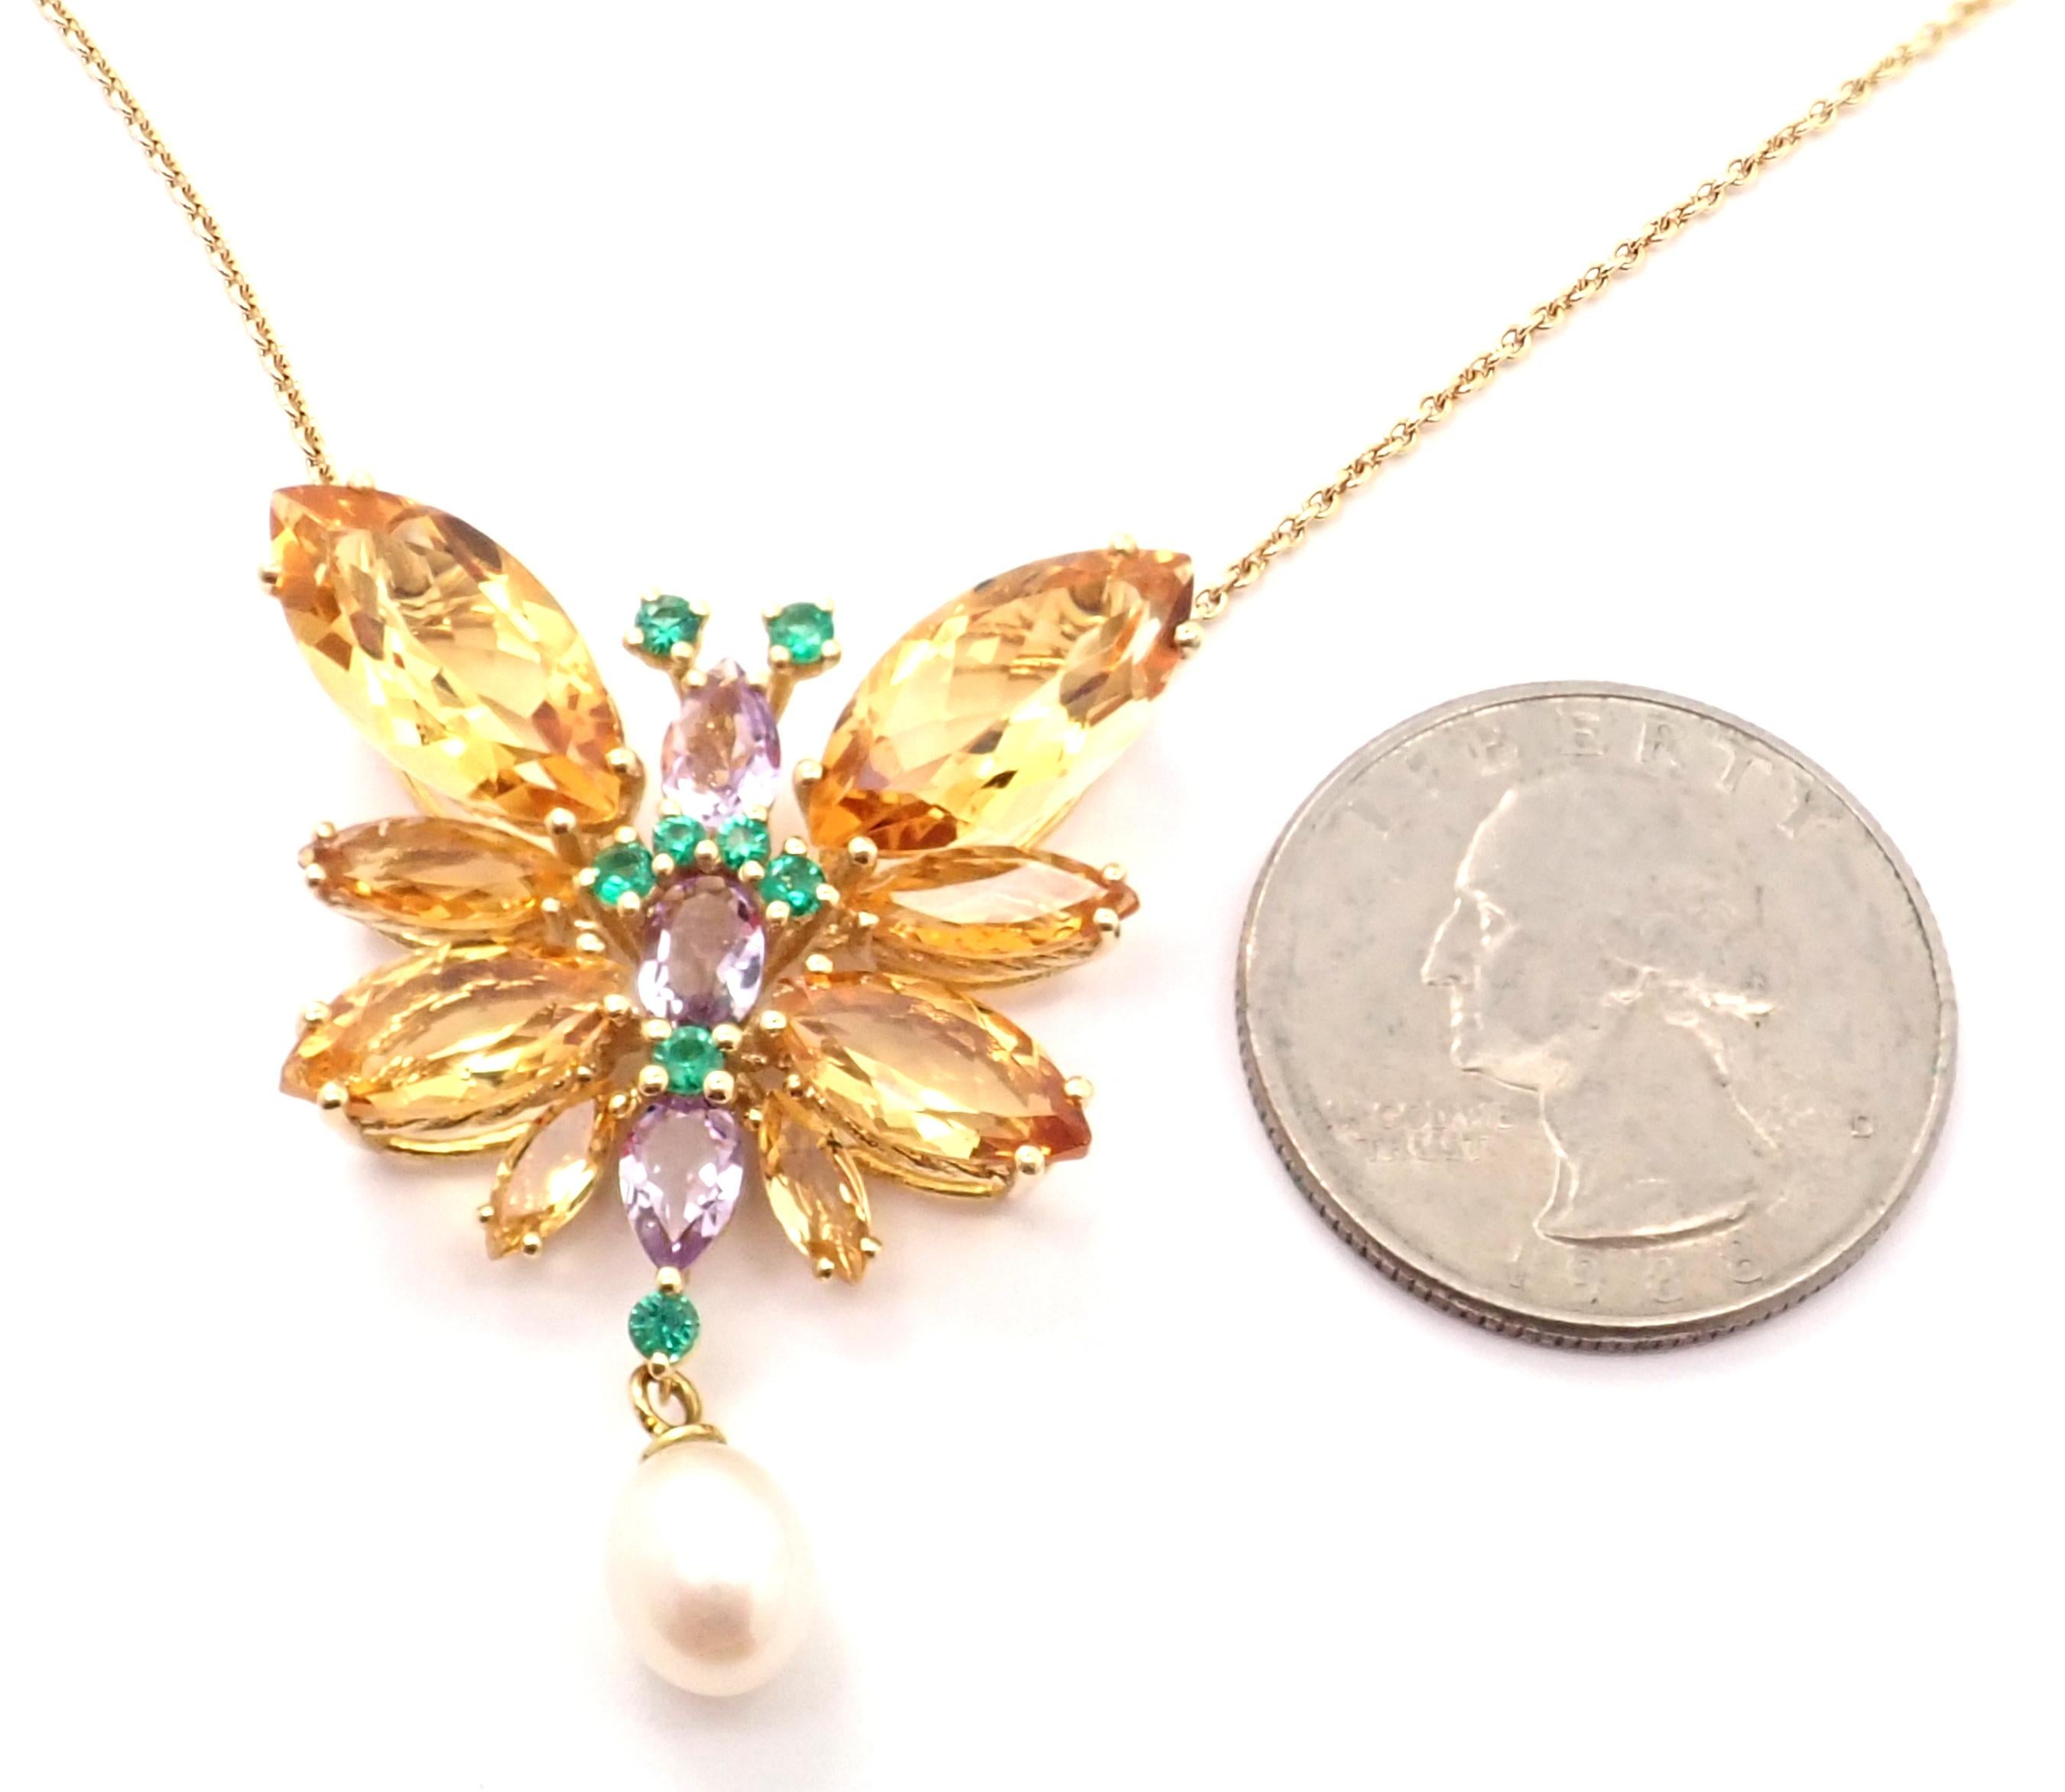 Dolce & Gabbana Spring Citrine Amethyst Butterfly Yellow Gold Pendant Necklace In Excellent Condition For Sale In Holland, PA